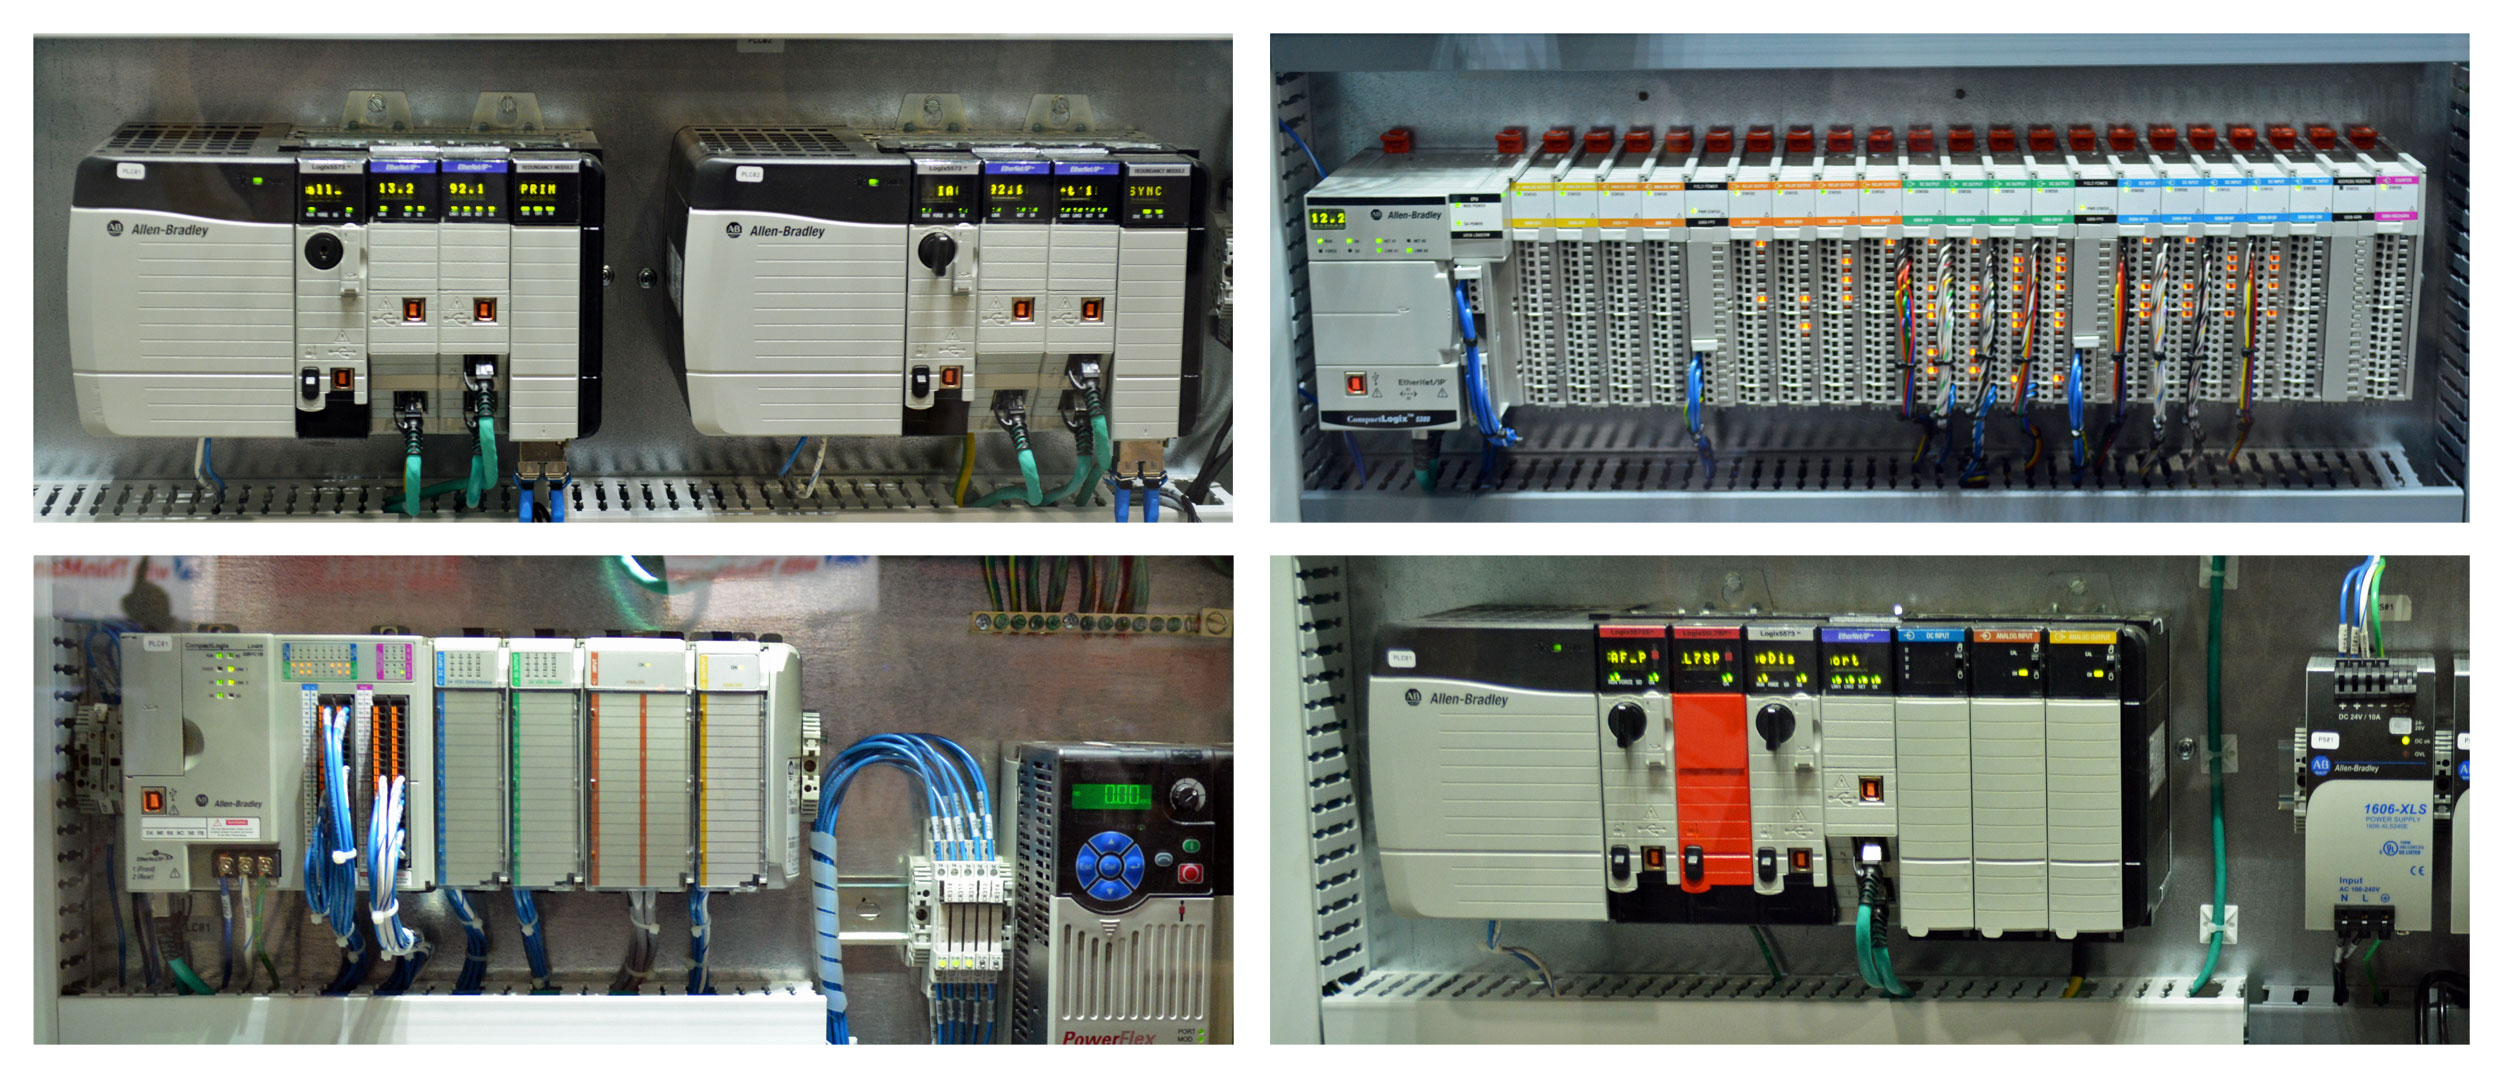 Rockwell Automation’s Programmable Automation Controllers